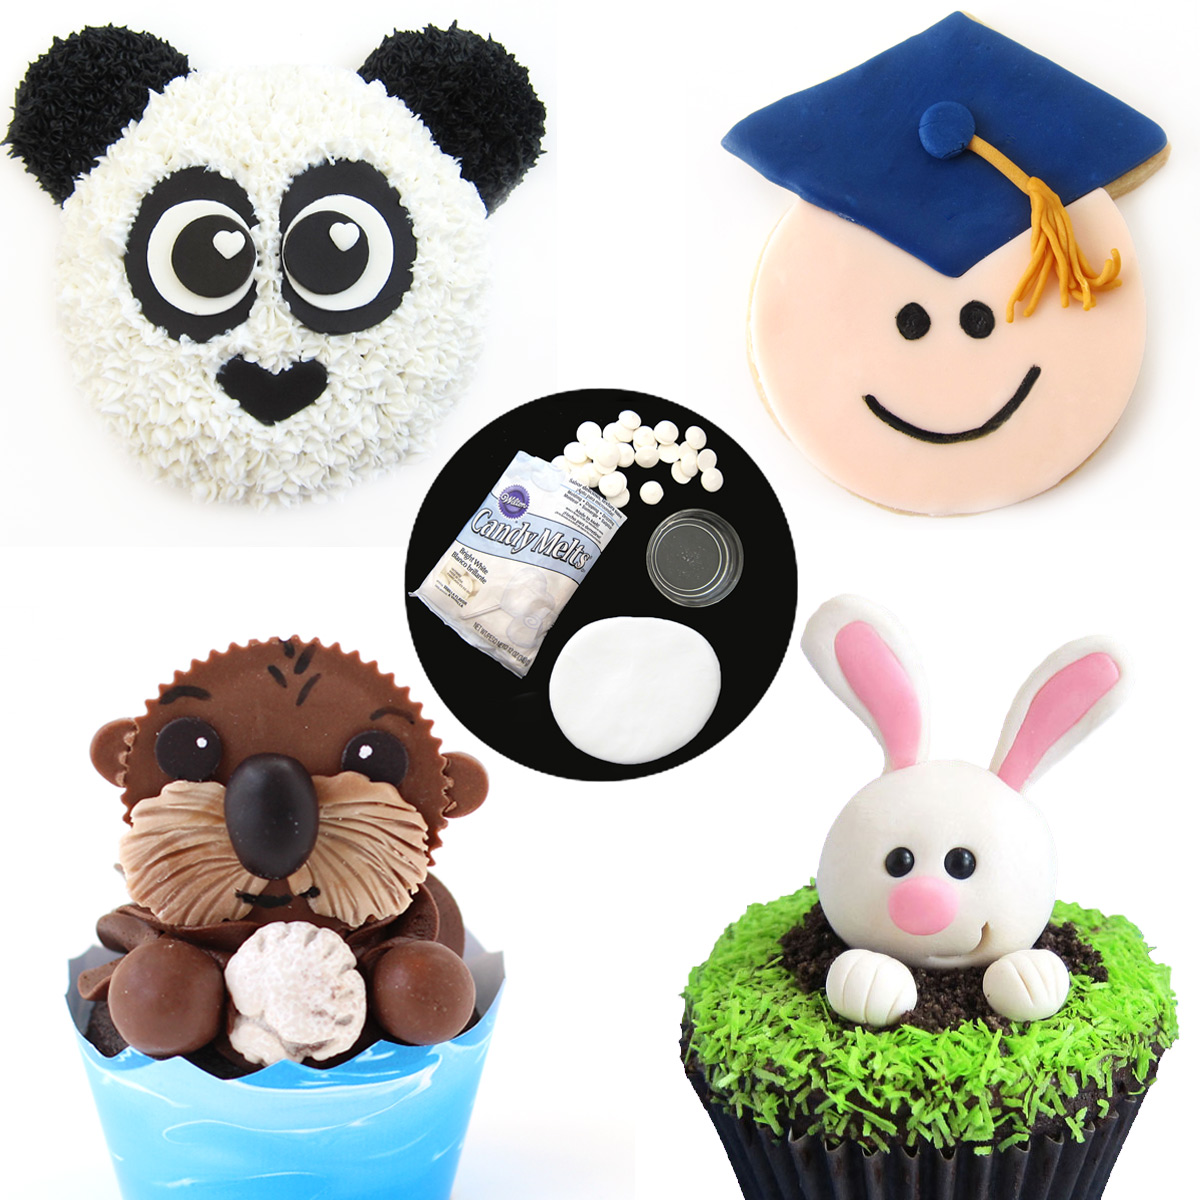 modeling chocolate decorations on a panda cake, graduation cookie, sea otter cupcake, and bunny cupcake